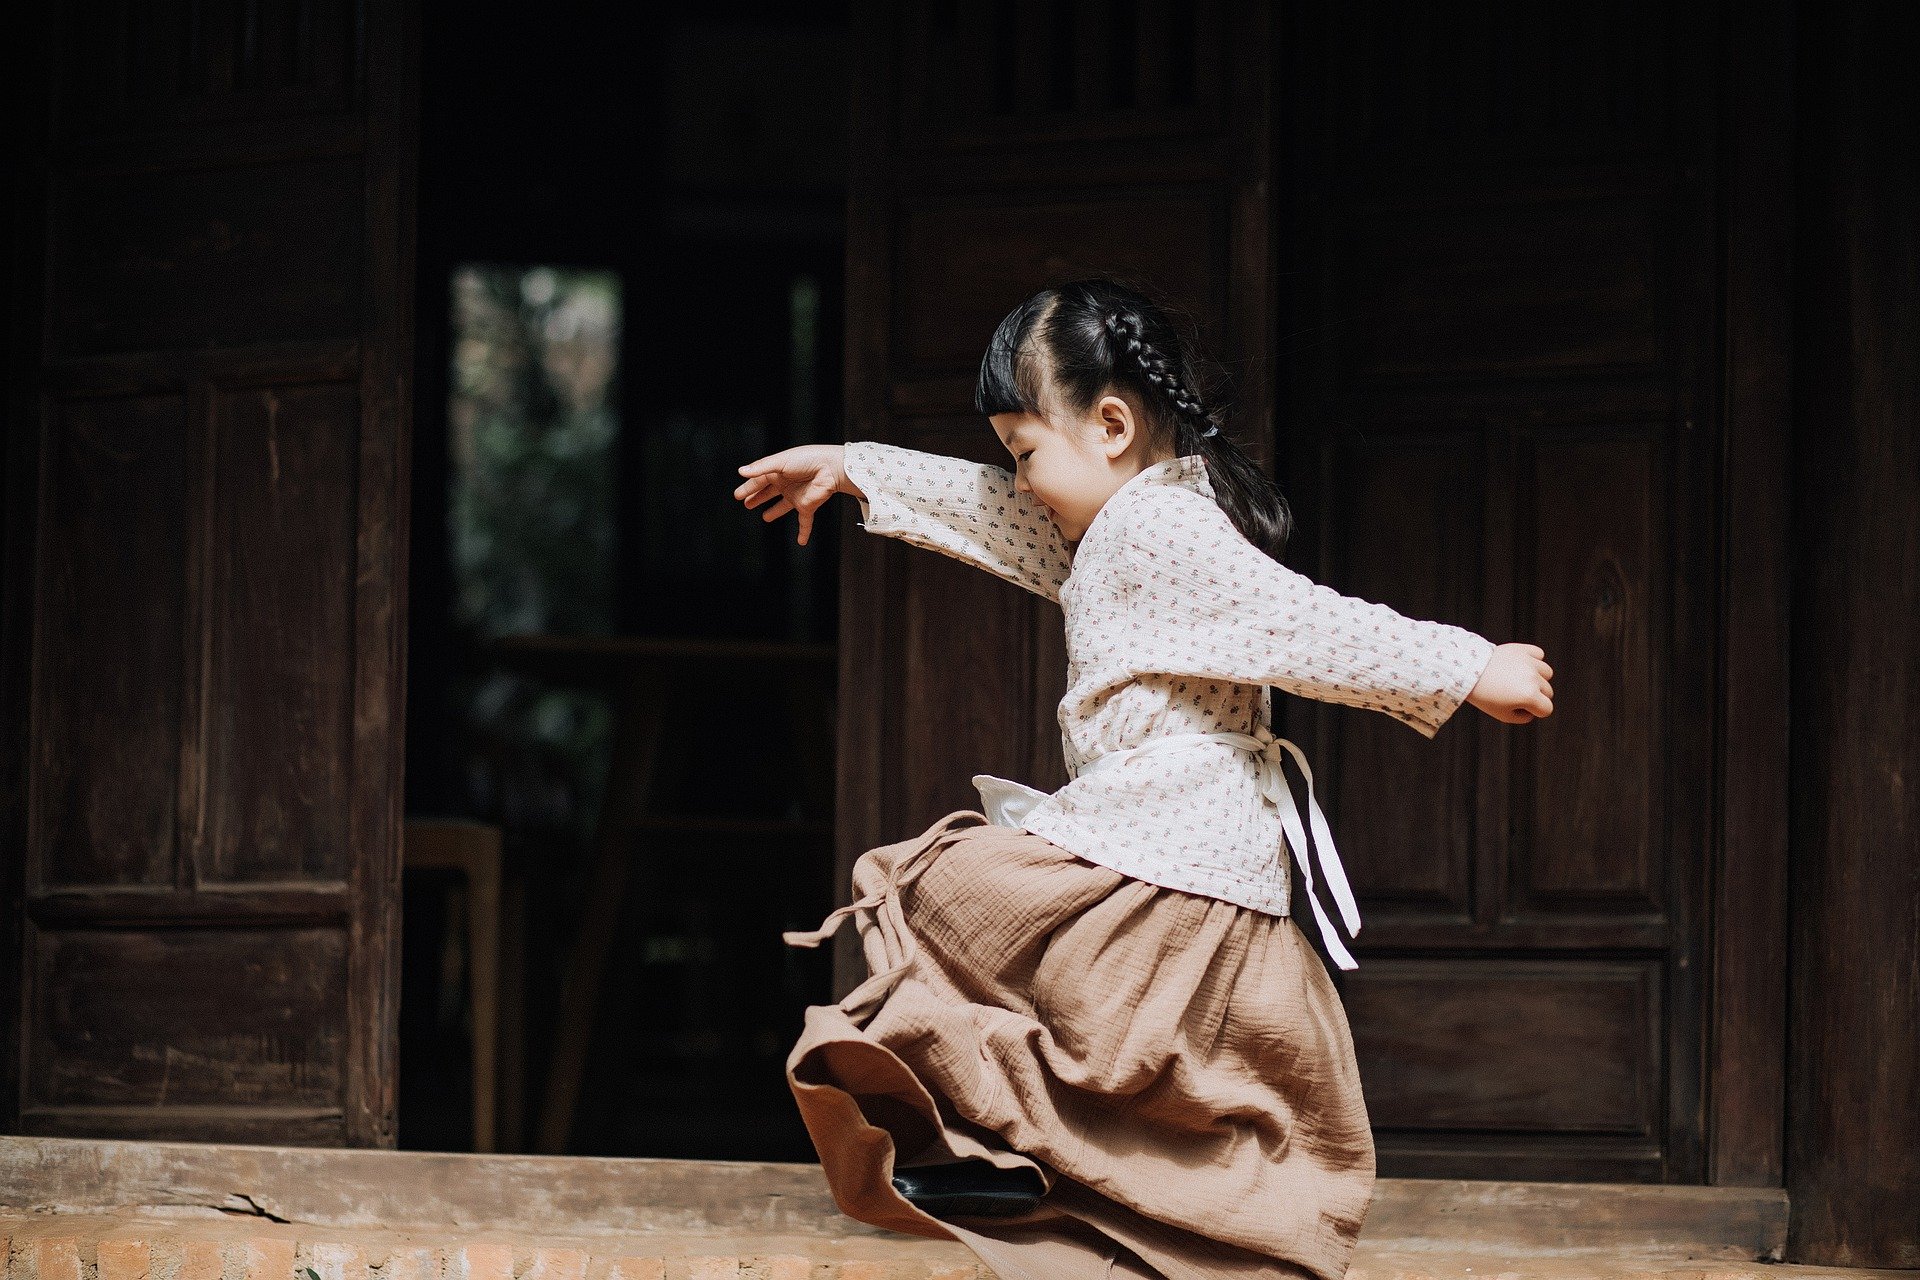 December 2022, South Korea: Truth and Reconciliation Commission to probe intercountry adoptions